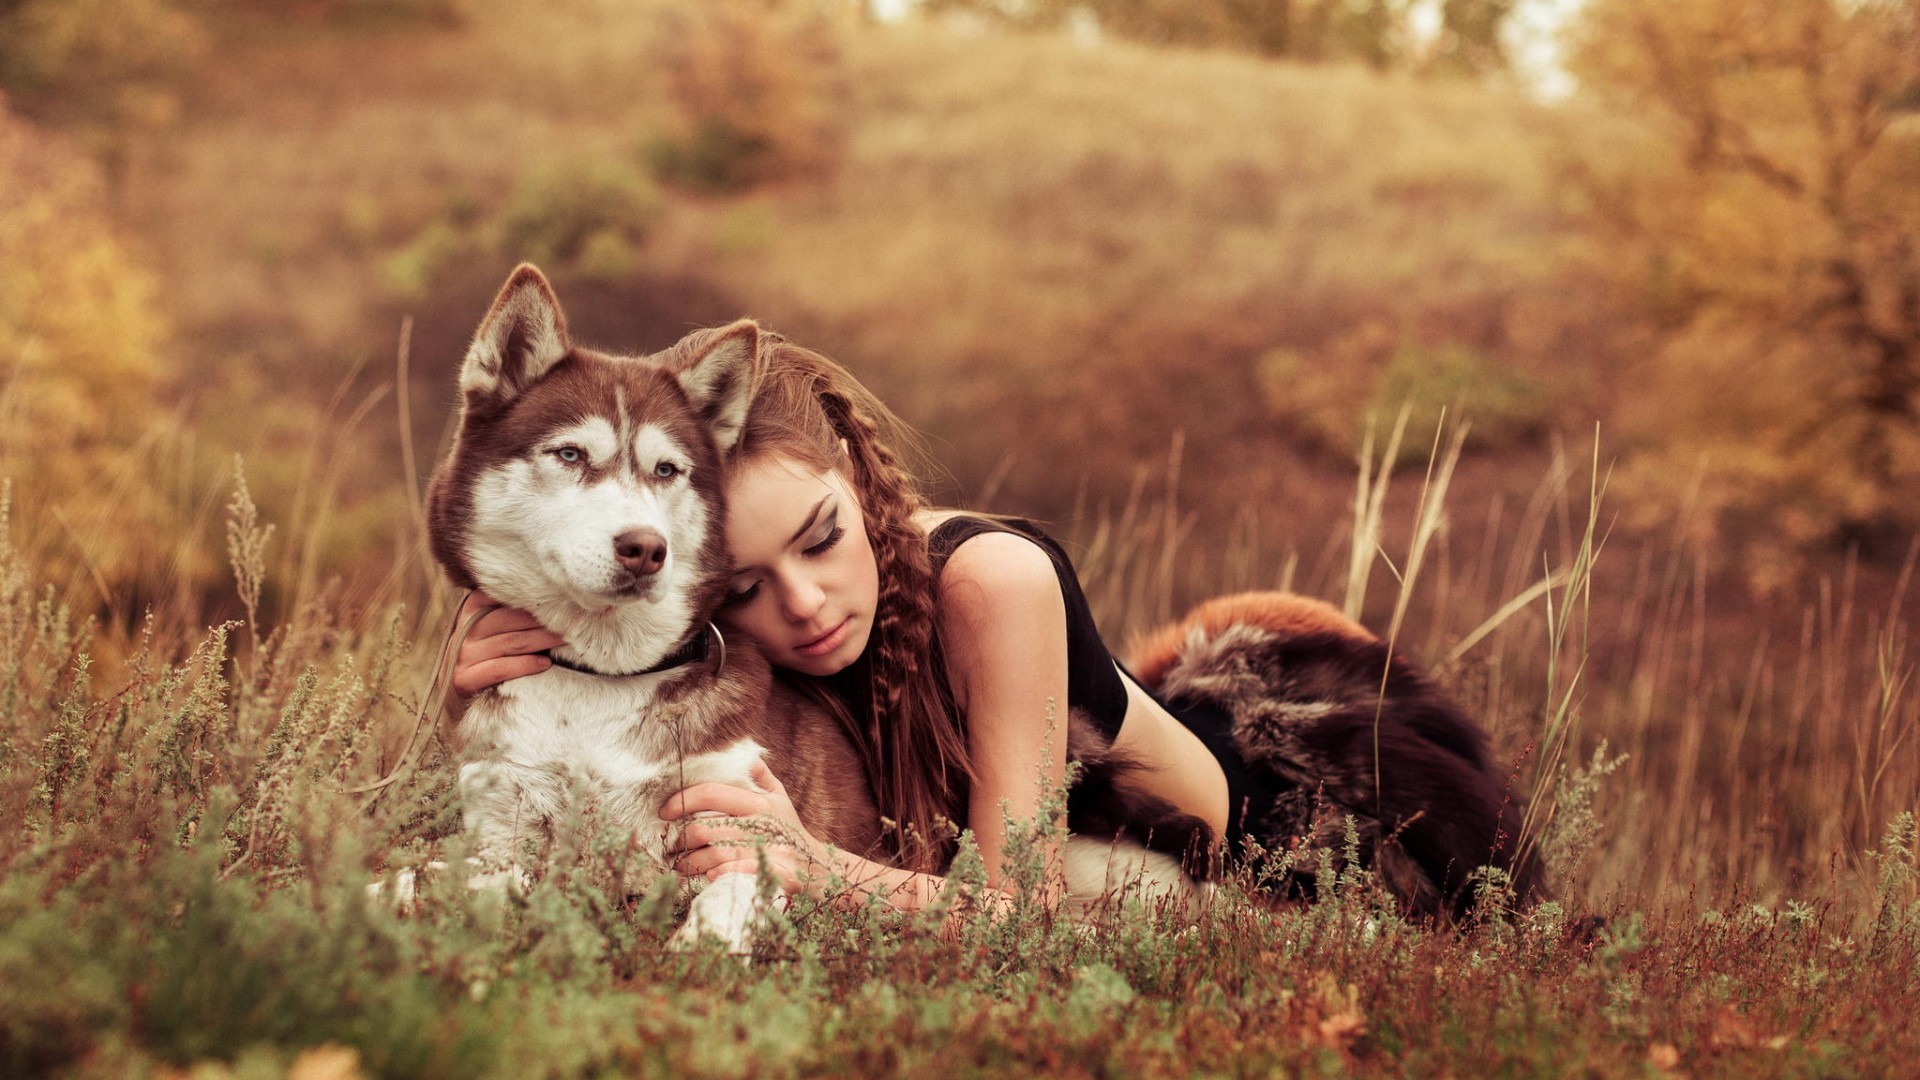 Siberian Husky Dog Hugging Women Outdoors Animals Closed Eyes Women With Dogs 1920x1080